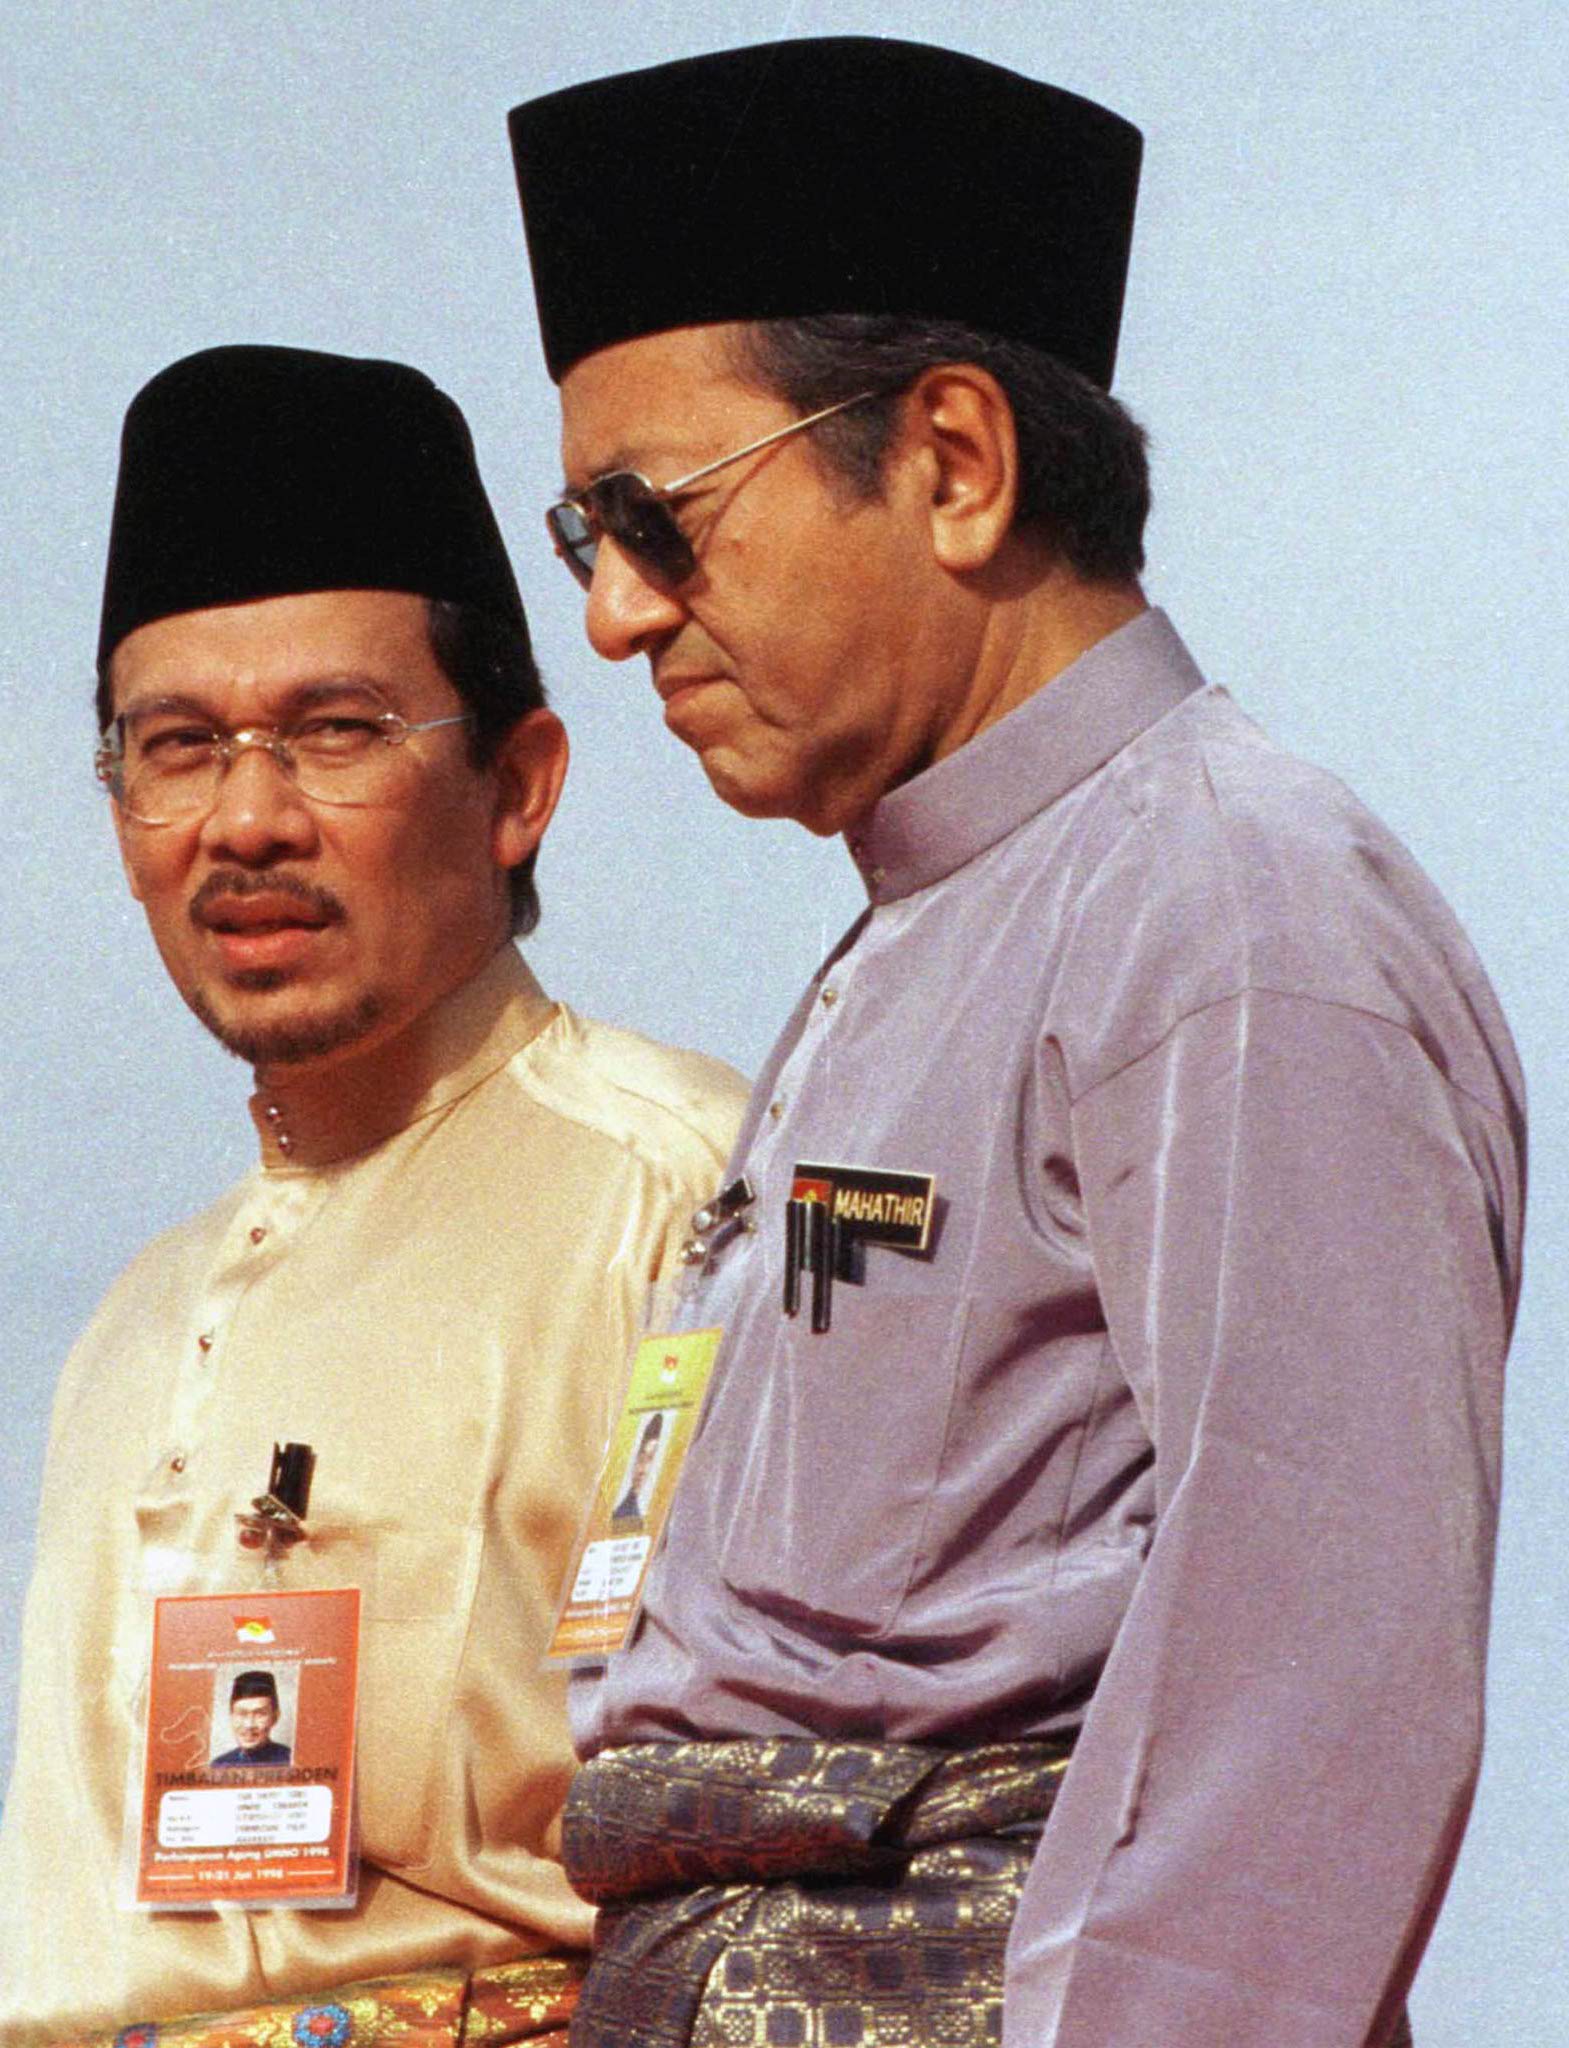 FILE PHOTO OF MALAYSIAN DEPUTY PRIME MINISTER ANWAR IBRAHIM WITH PRIME MINISTER MAHATHIR MOHAMAD.